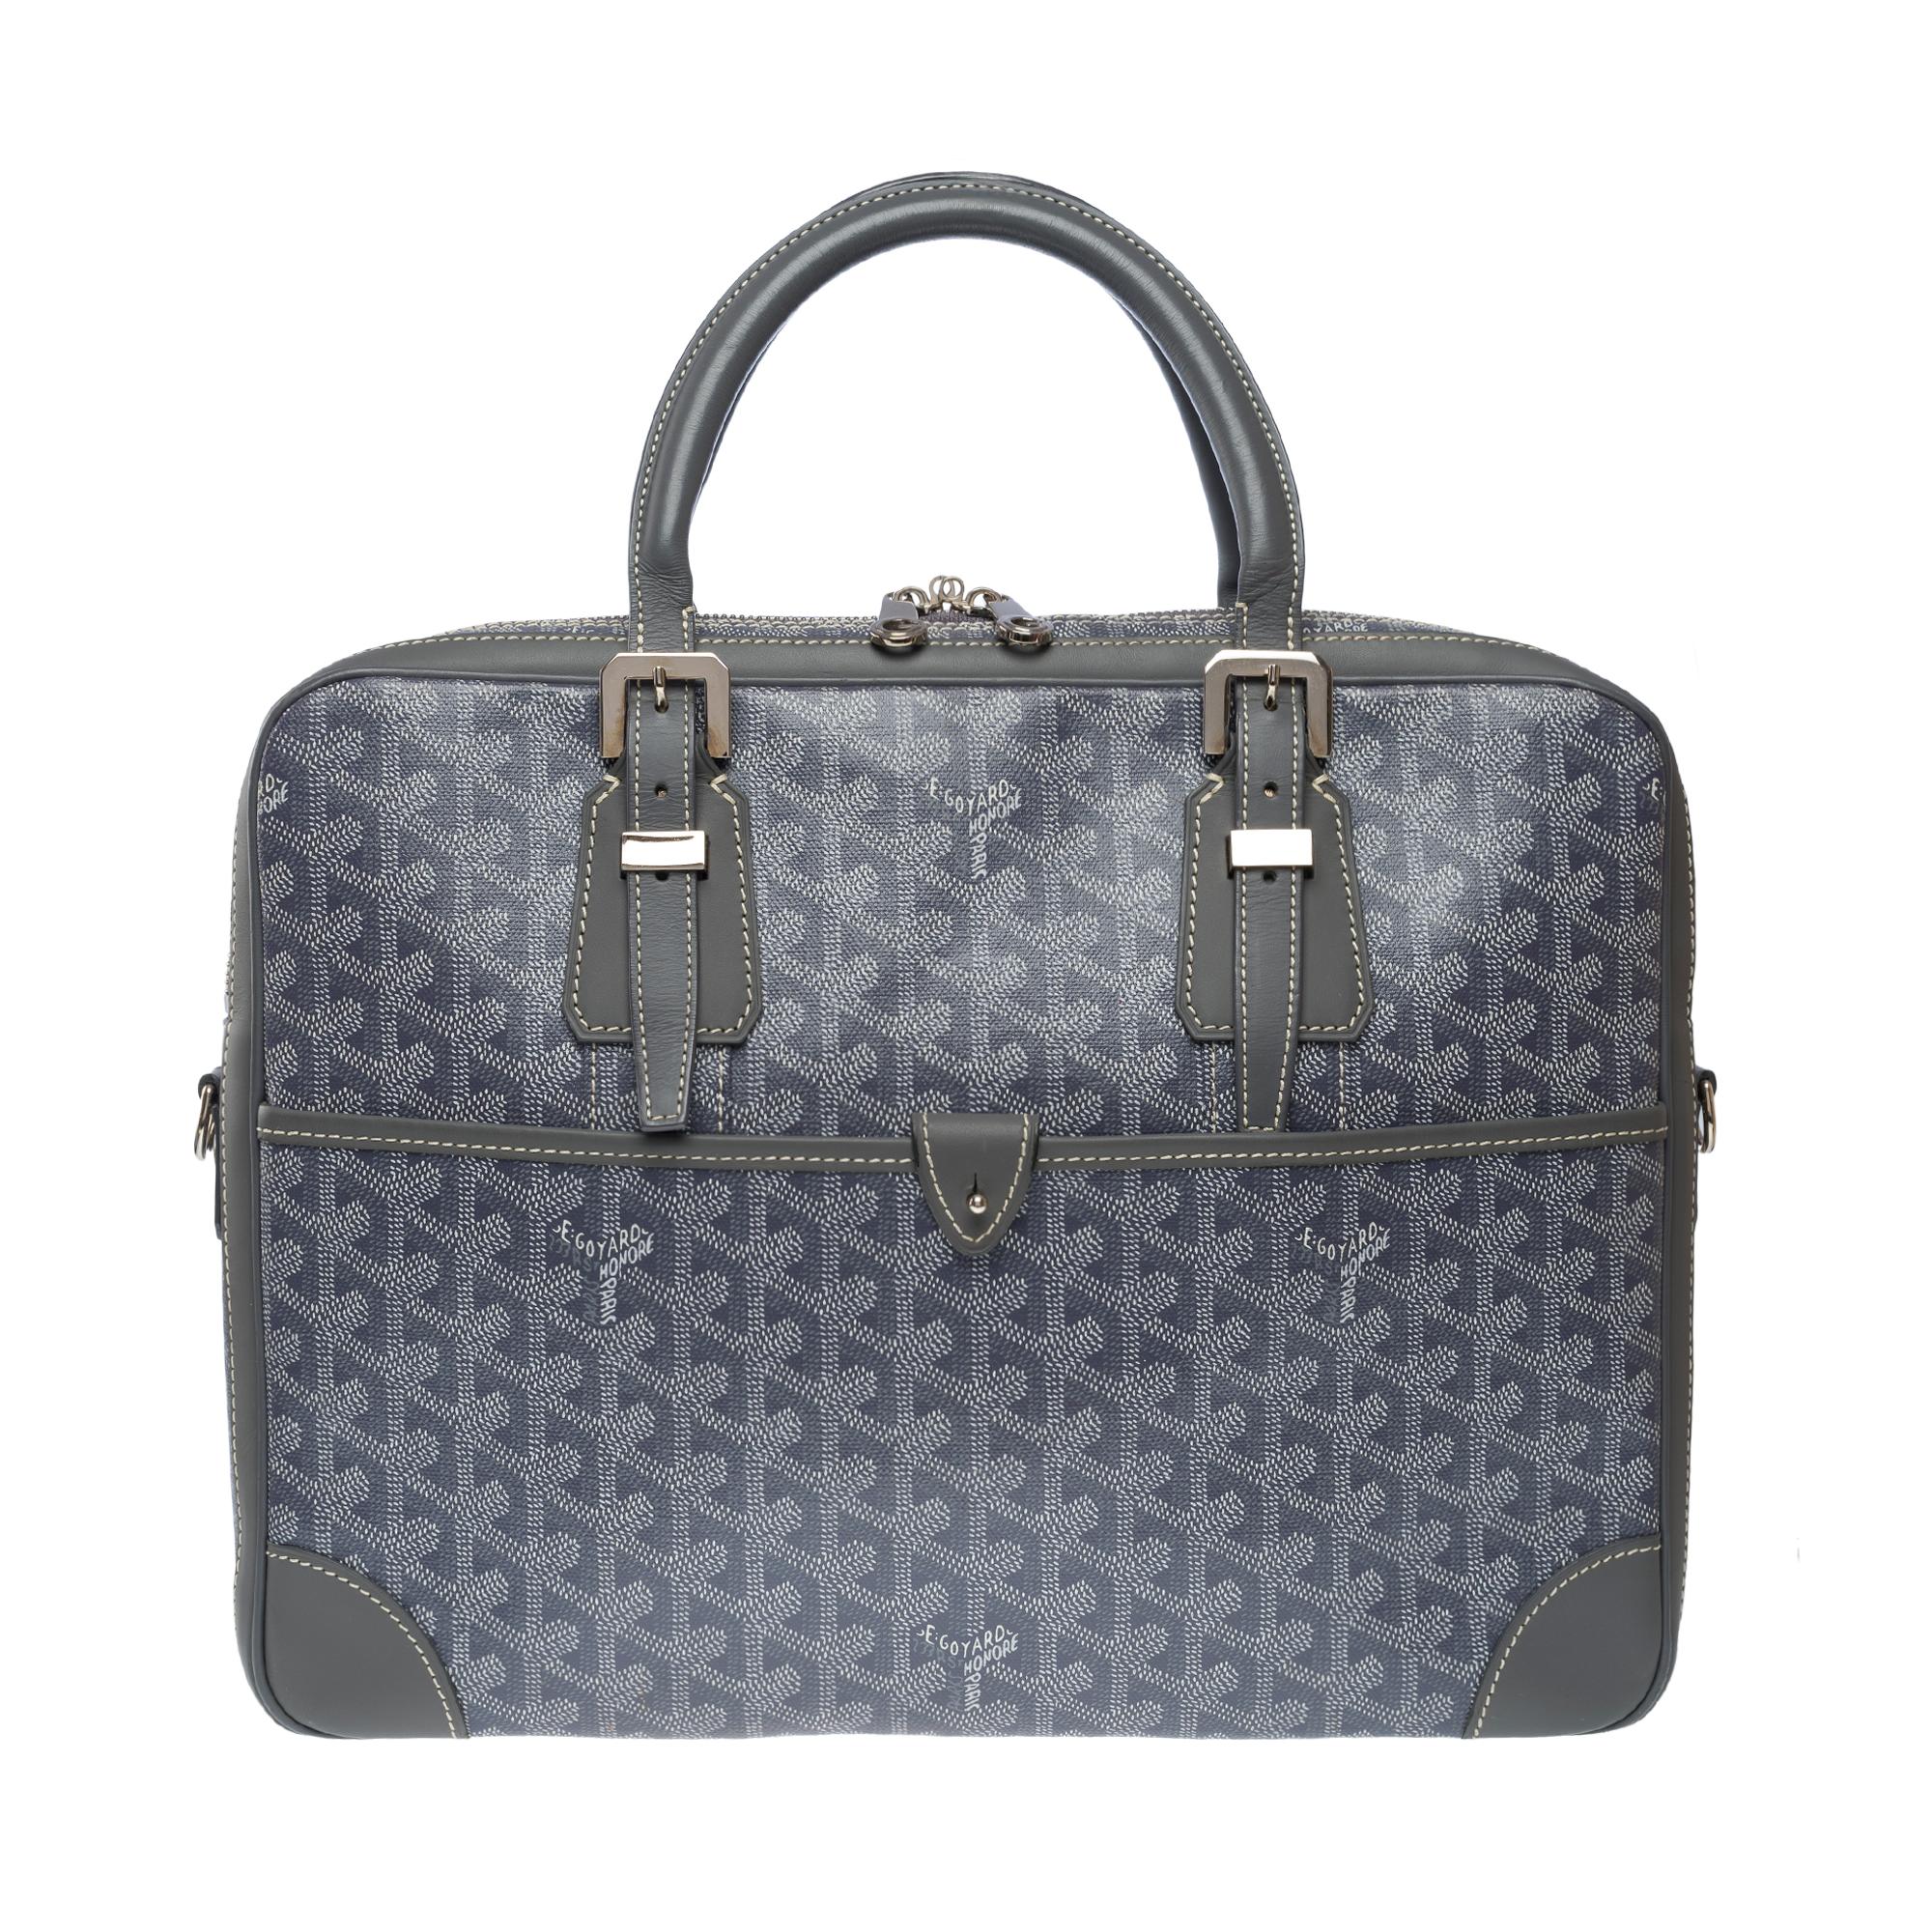 Elegant​ ​Goyard​ ​Ambassade​ ​briefcase​ ​in​ ​grey​ ​Goyardine​ ​canvas​ ​and​ ​grey​ ​Cervon​ ​calfskin​ ​leather​ ​,​ ​silver​ ​metal​ ​trim,​ ​double​ ​grey​ ​leather​ ​handle​ ​for​ ​hand​ ​carry

Zipper
A​ ​patch​ ​pocket​ ​at​ ​the​ ​front​